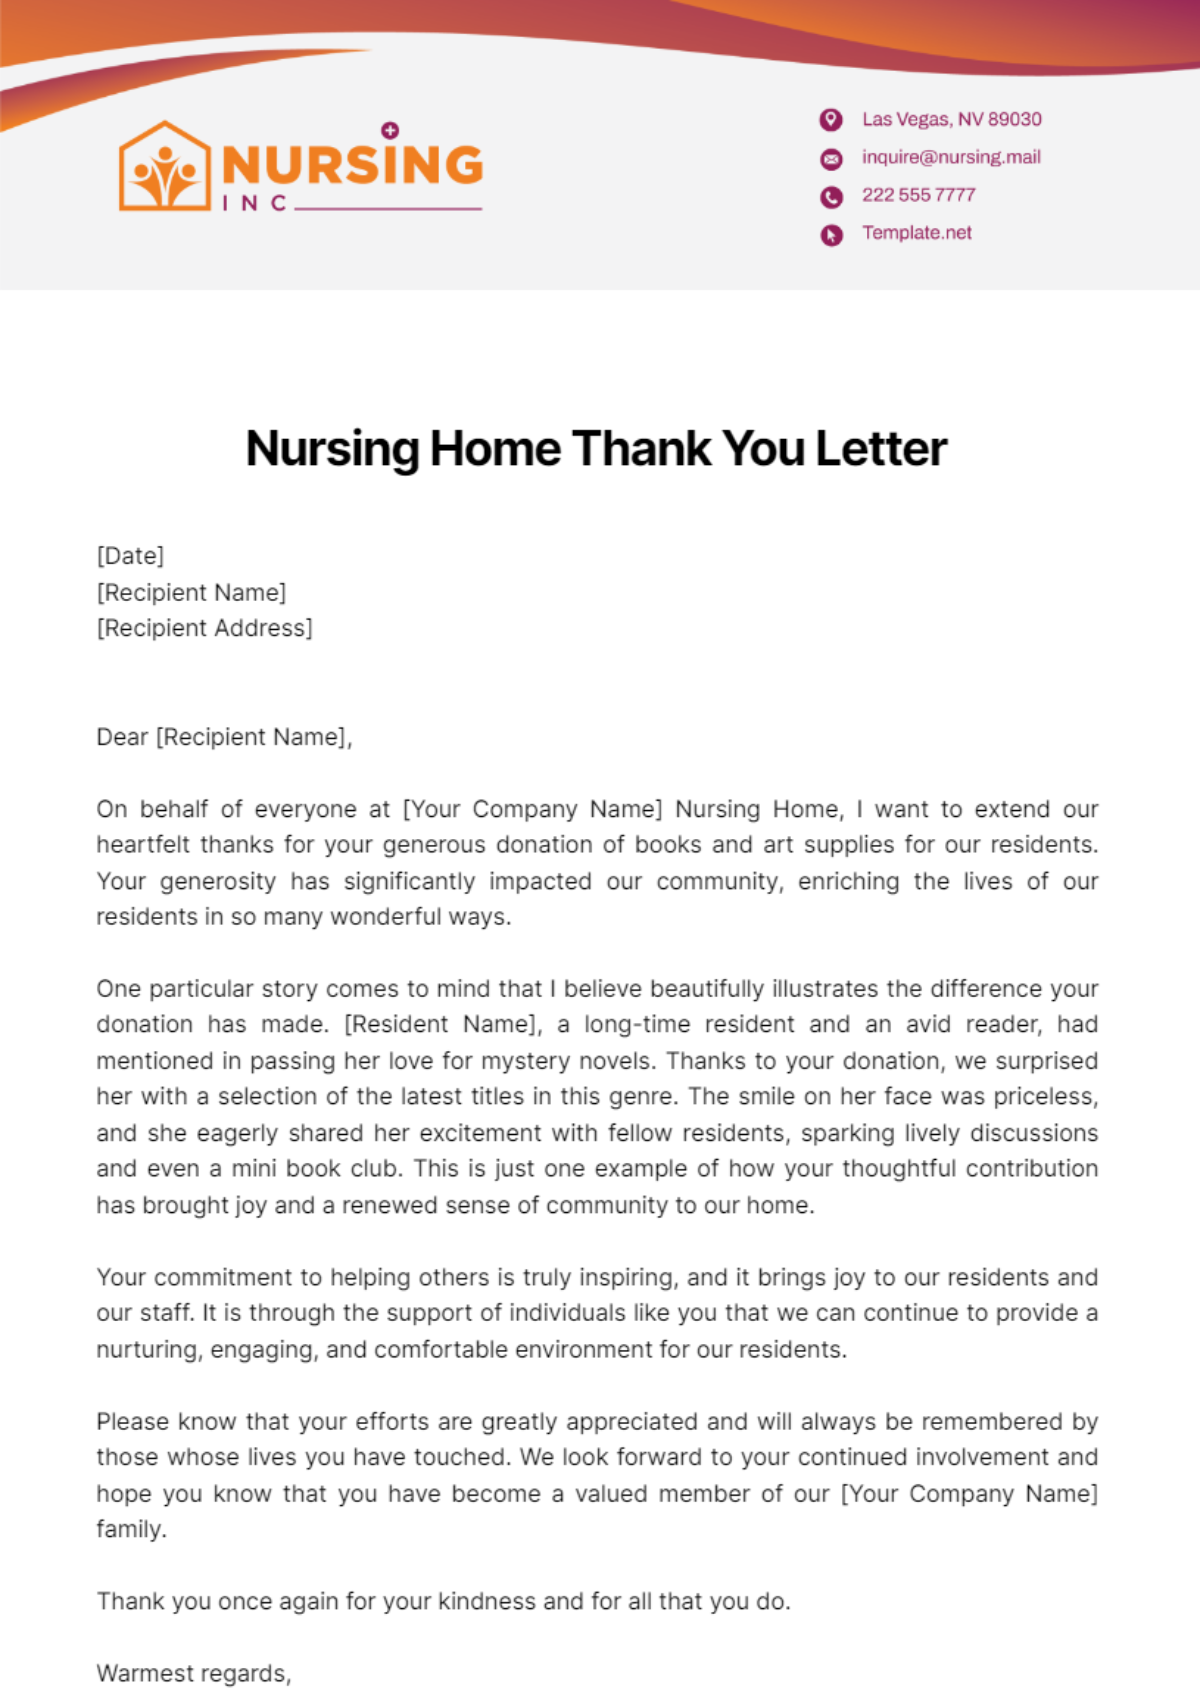 Nursing Home Thank You Letter Template